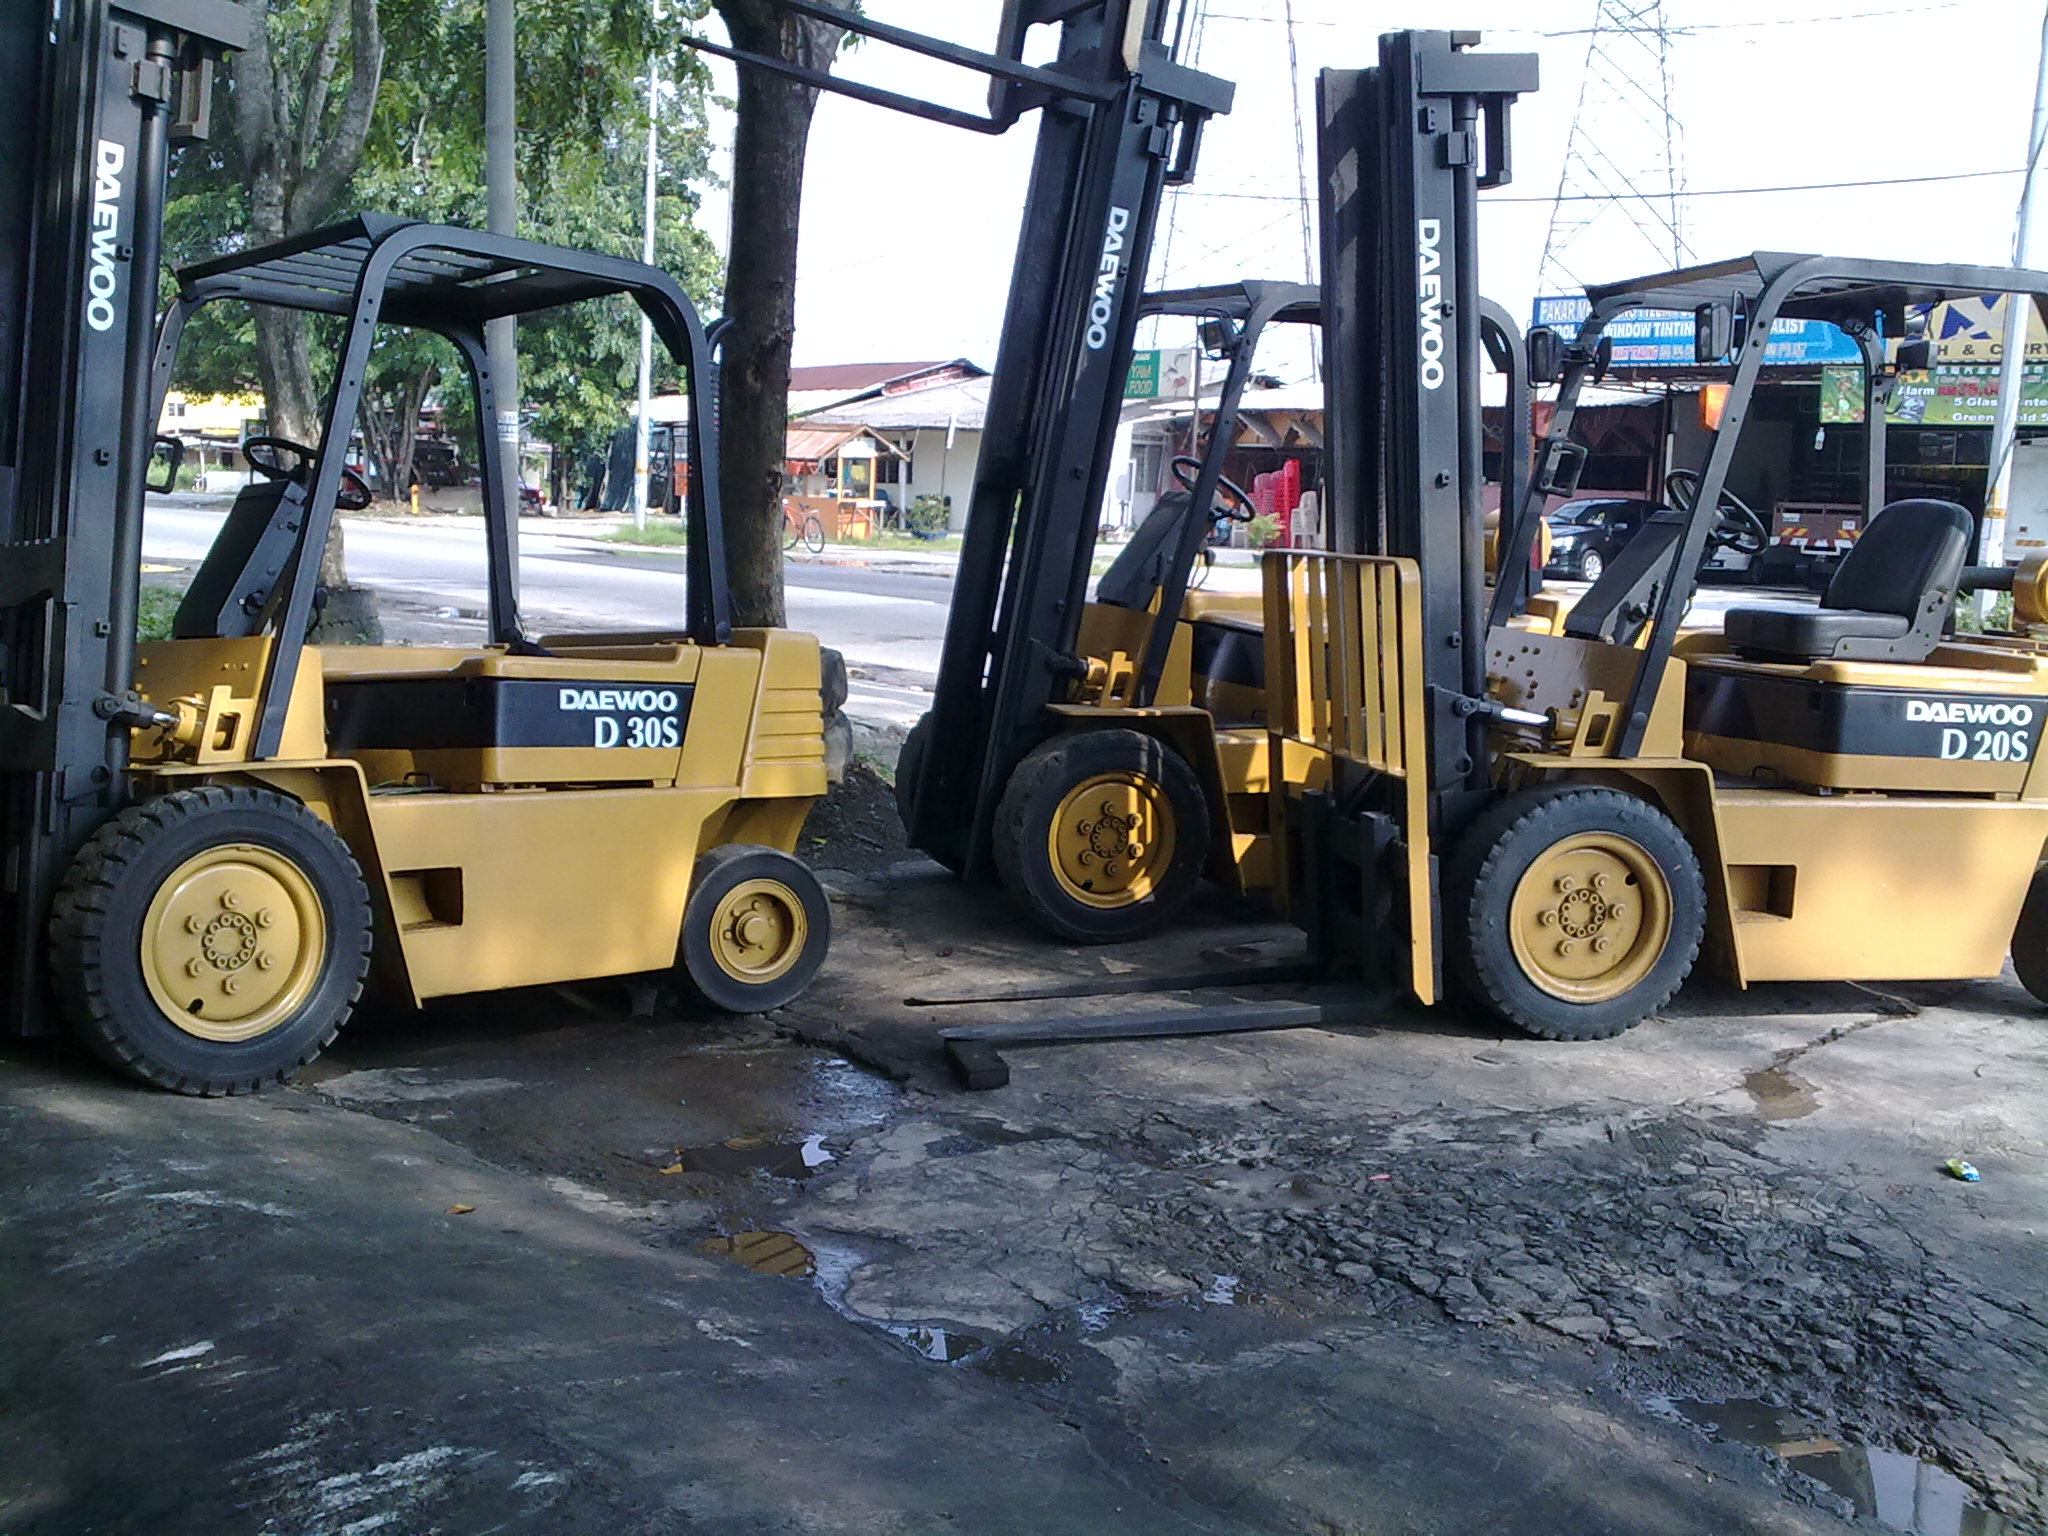 1080p Daewoo Forklift Hd Images